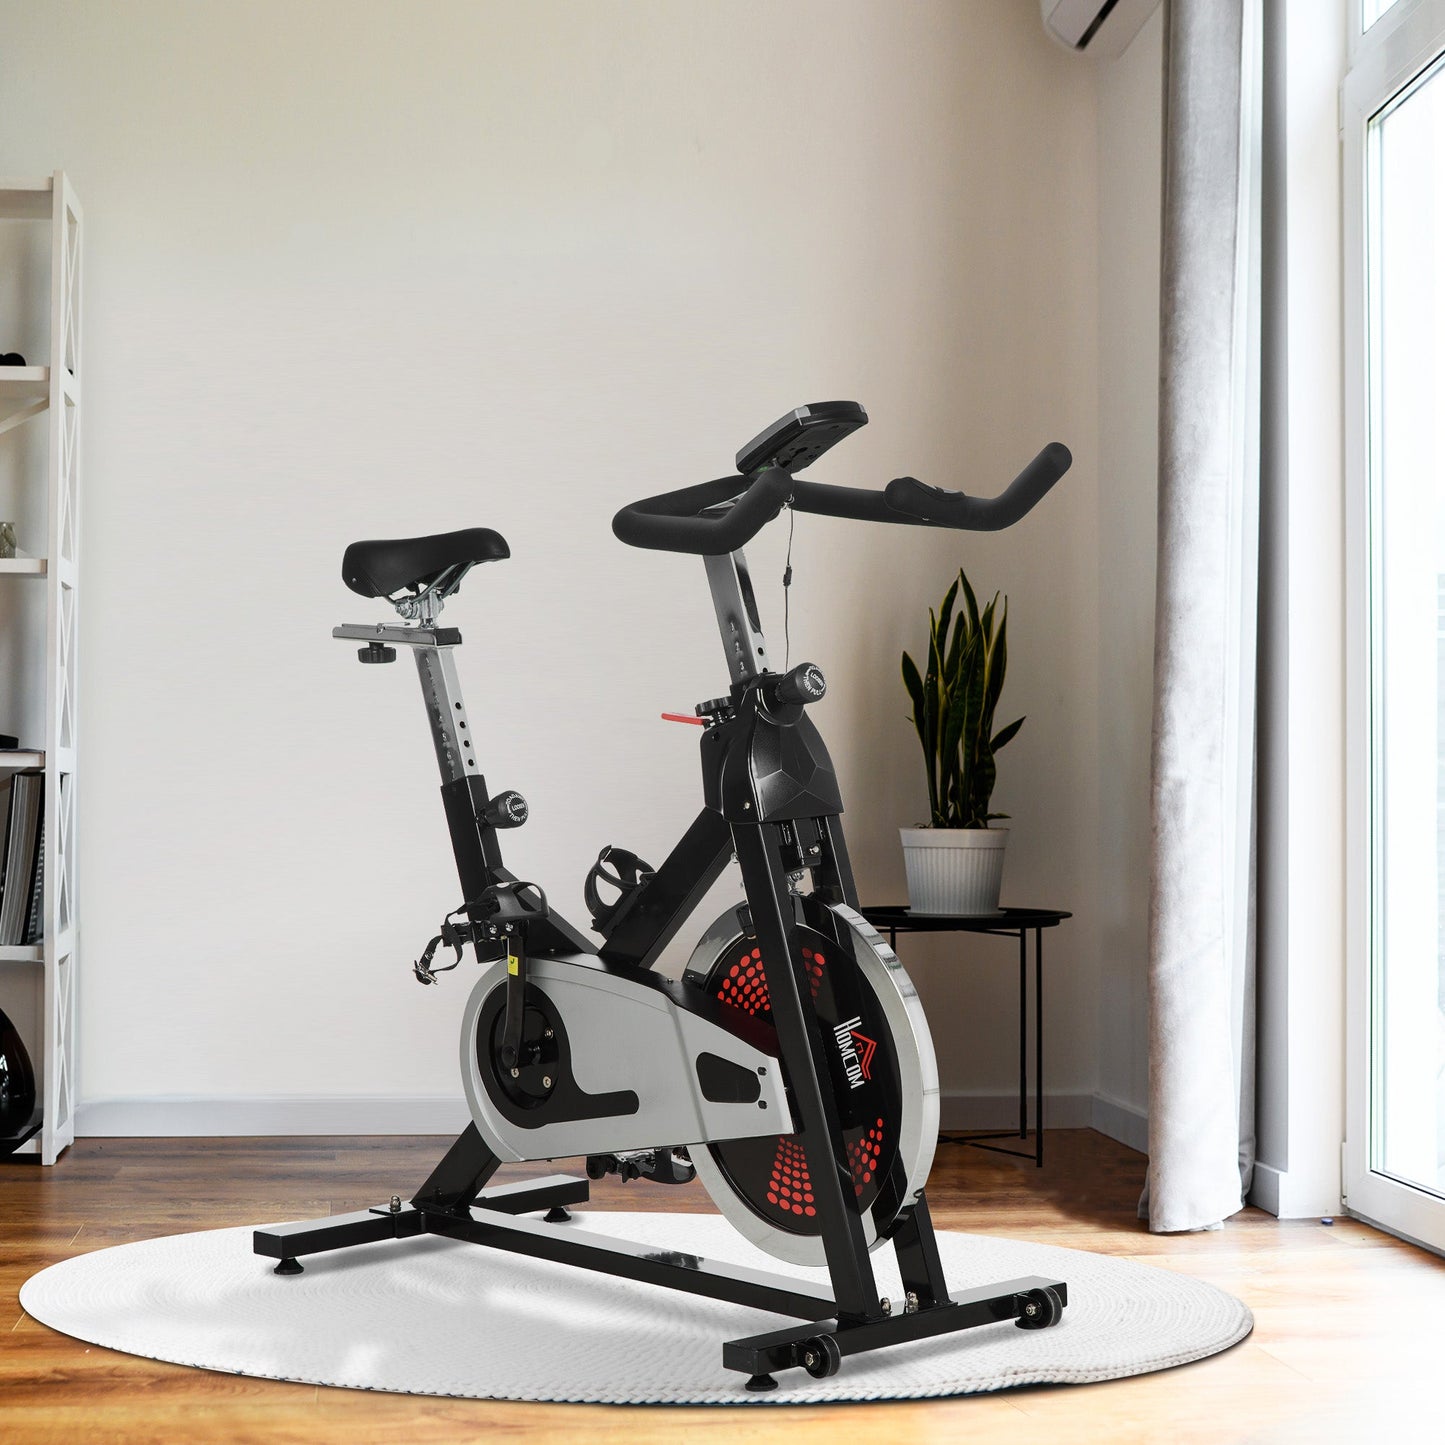 Indoor Exercise Bike, Stationary Bike, Cycling Machine with Adjustable Seat & Resistance, Wheels, 18kg Flywheel, Cup Holder and LCD Monitor